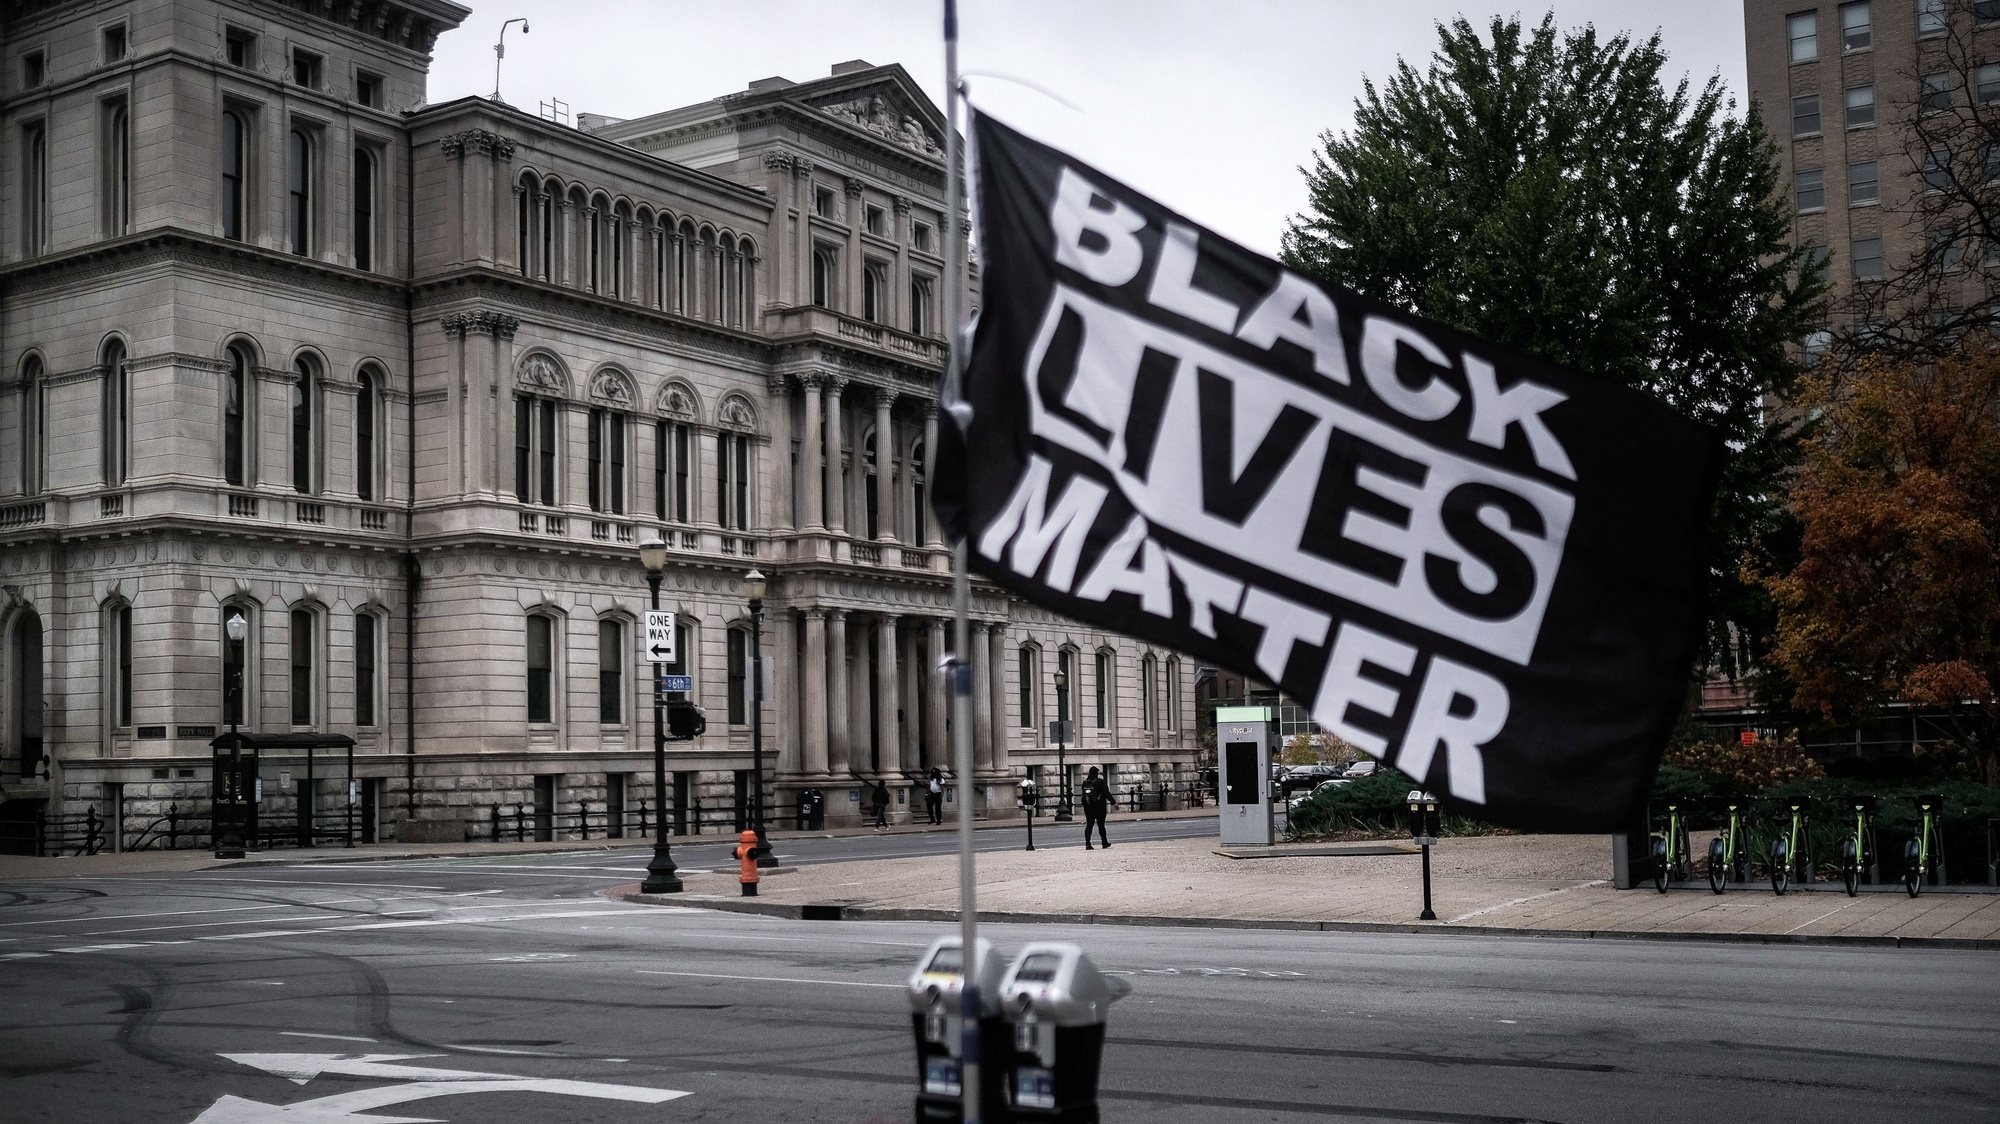 epa08780003 A Black Lives Matter flag flies in downtown Louisville, Kentucky, USA, 26 October 2020 (issued on 28 October 2020). Louisville is deserted, with commerce closed and with multiple tributes to Breonna Taylor, who was murdered by police, at a time when the faith of Bishop Dennis V. Lyons Sr. is trying to give strength to the Democratic party in daily masses.  EPA/MARIO CRUZ  ATTENTION: This Image is part of a PHOTO SET